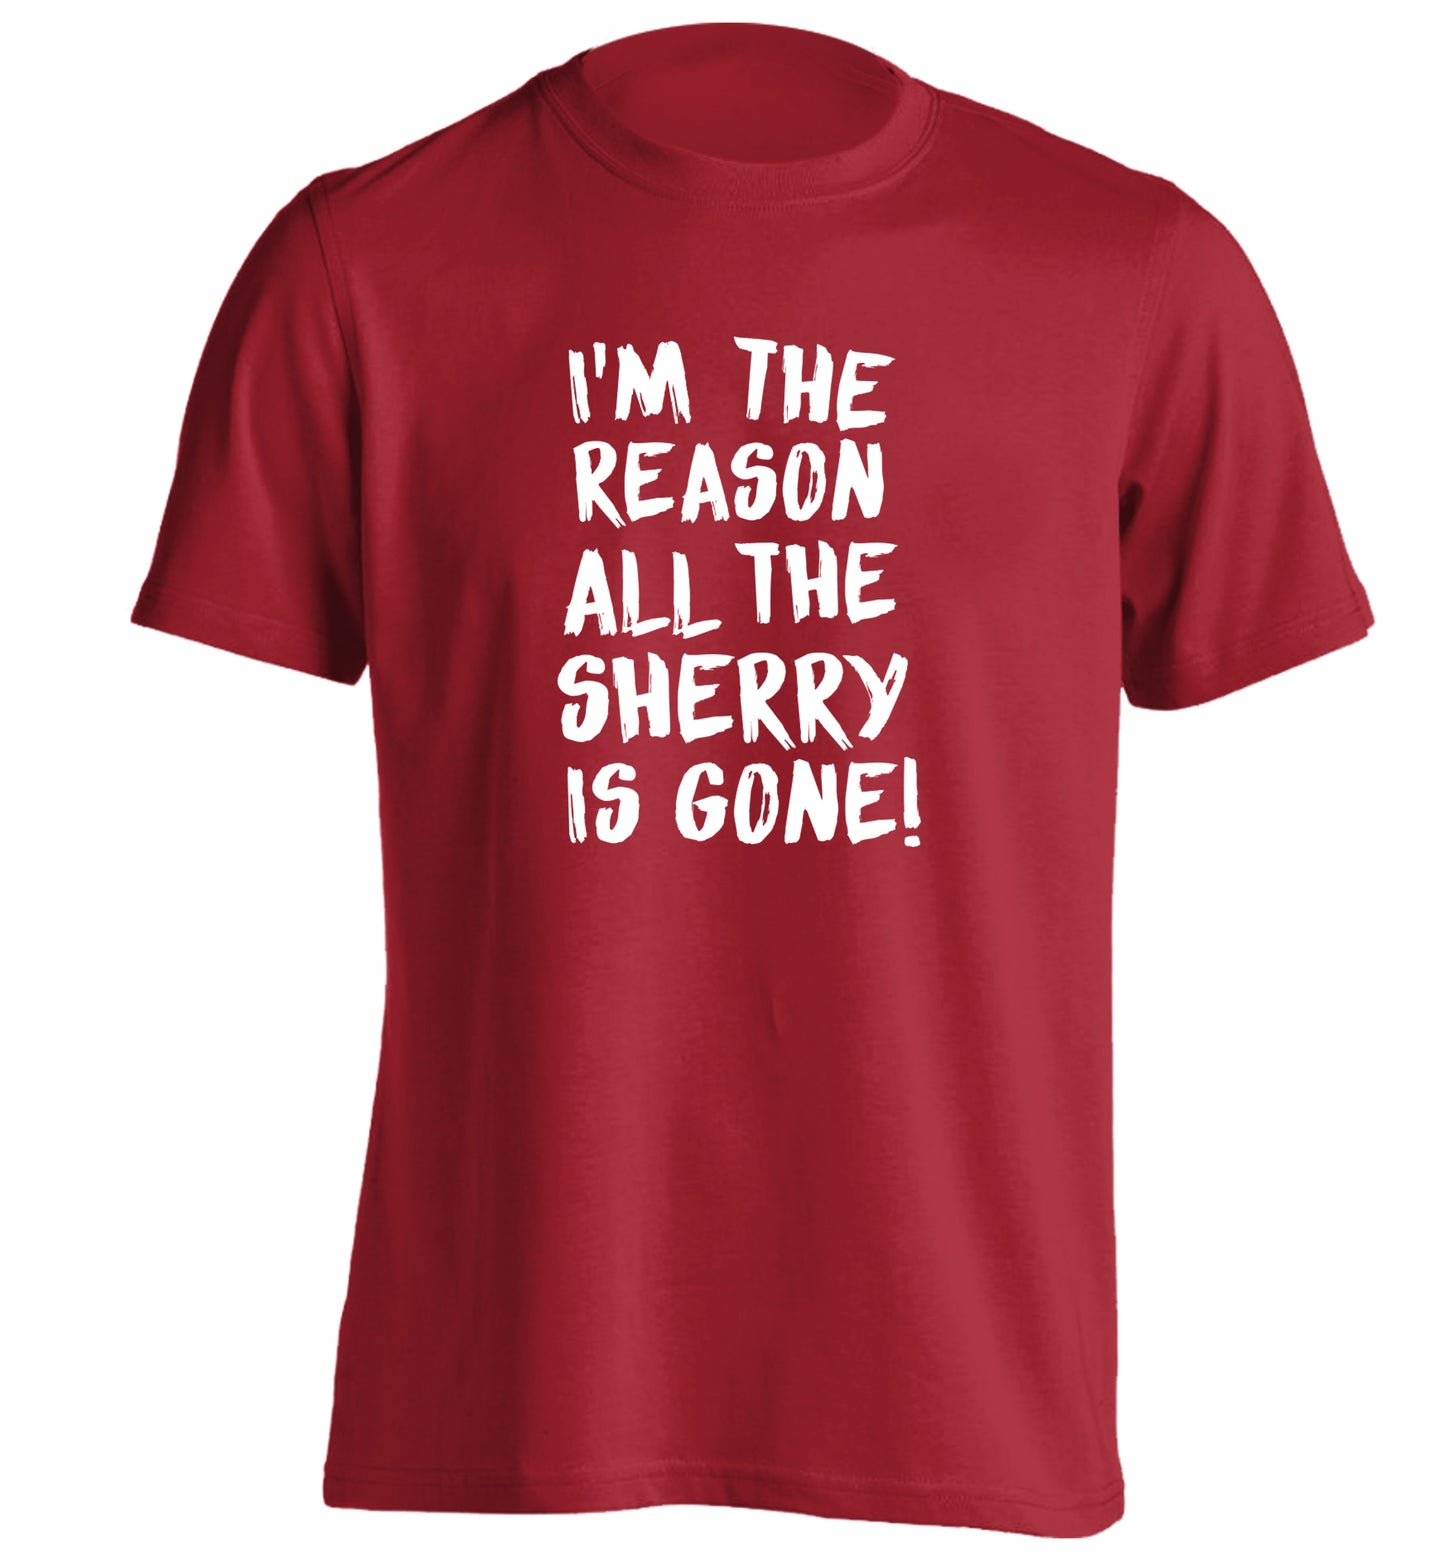 I'm the reason all the sherry is gone adults unisex red Tshirt 2XL